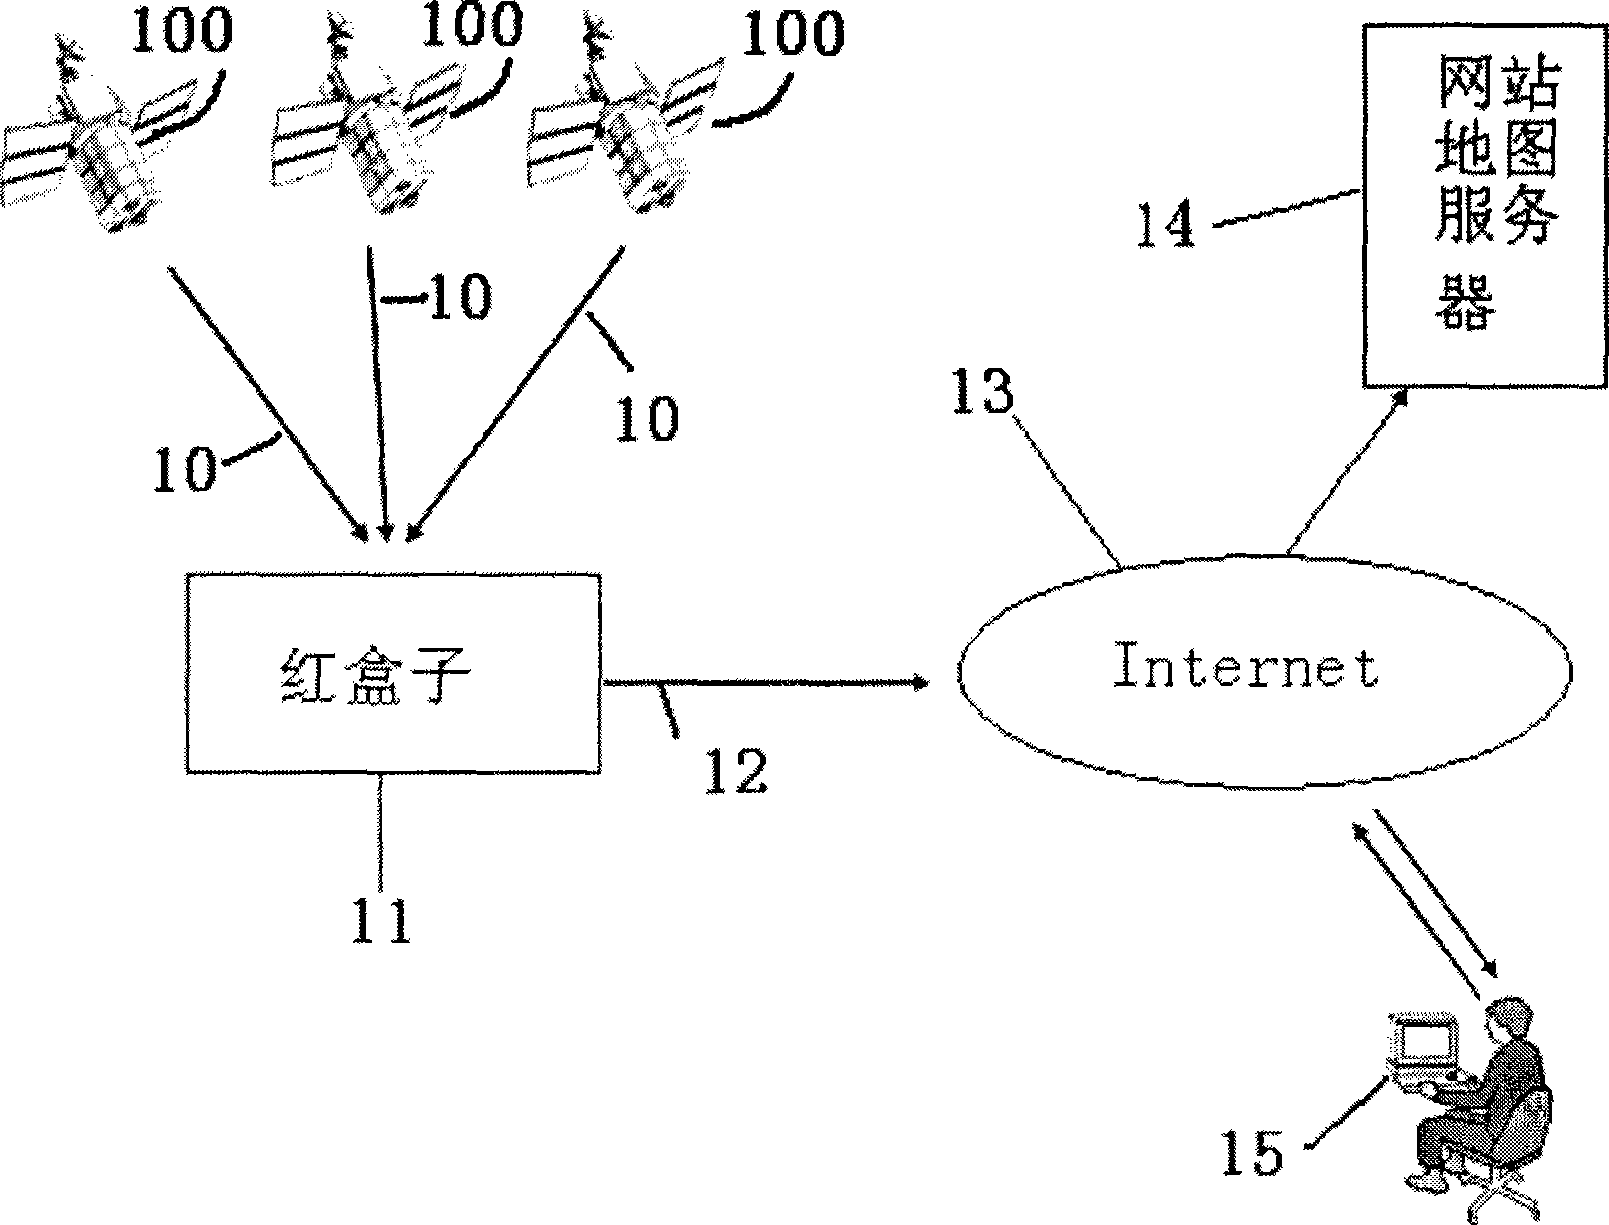 Data acquisition system and method based on GPS and website map server